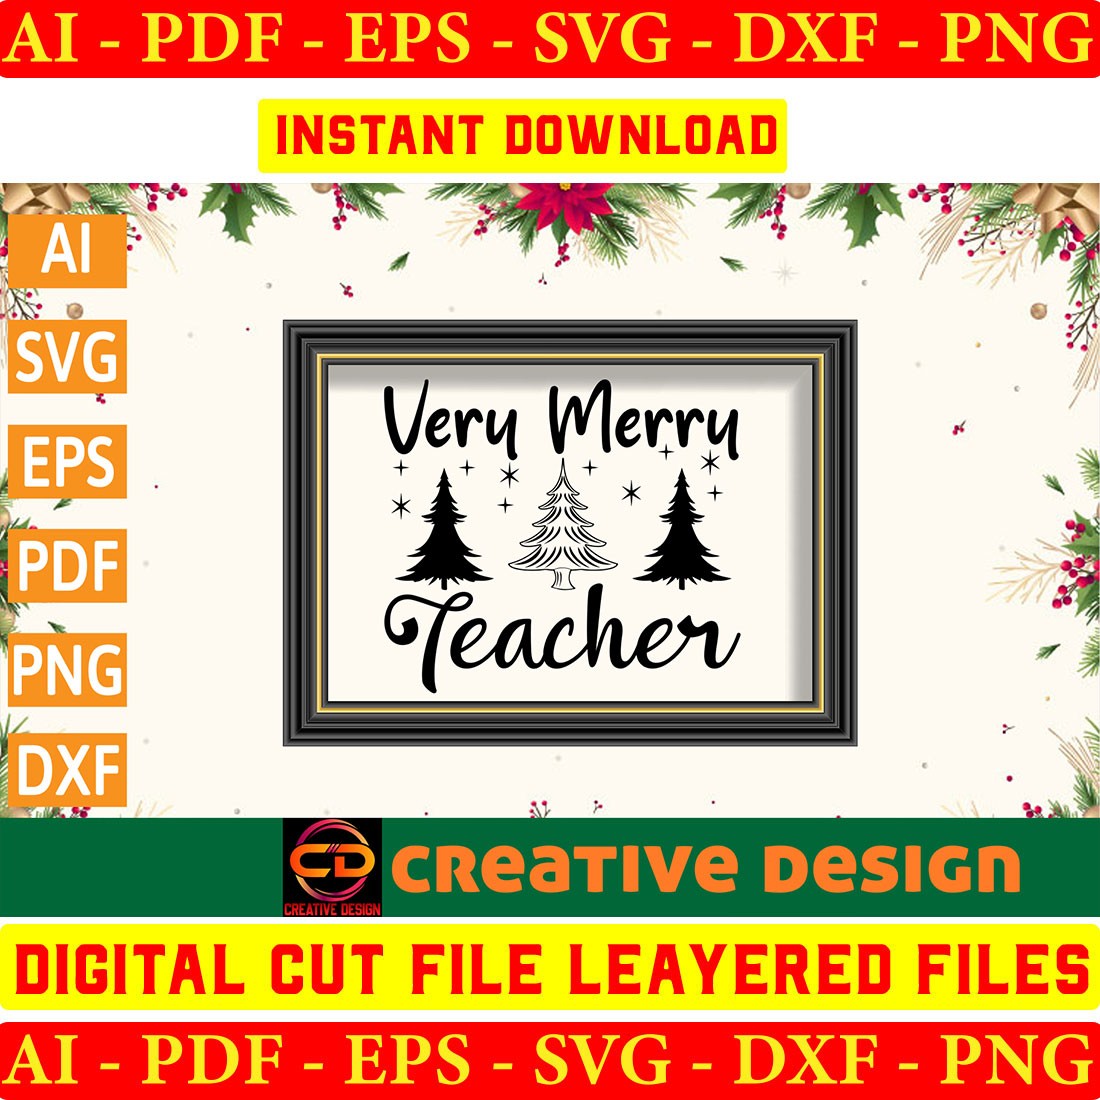 Merry teacher svg file with christmas trees.